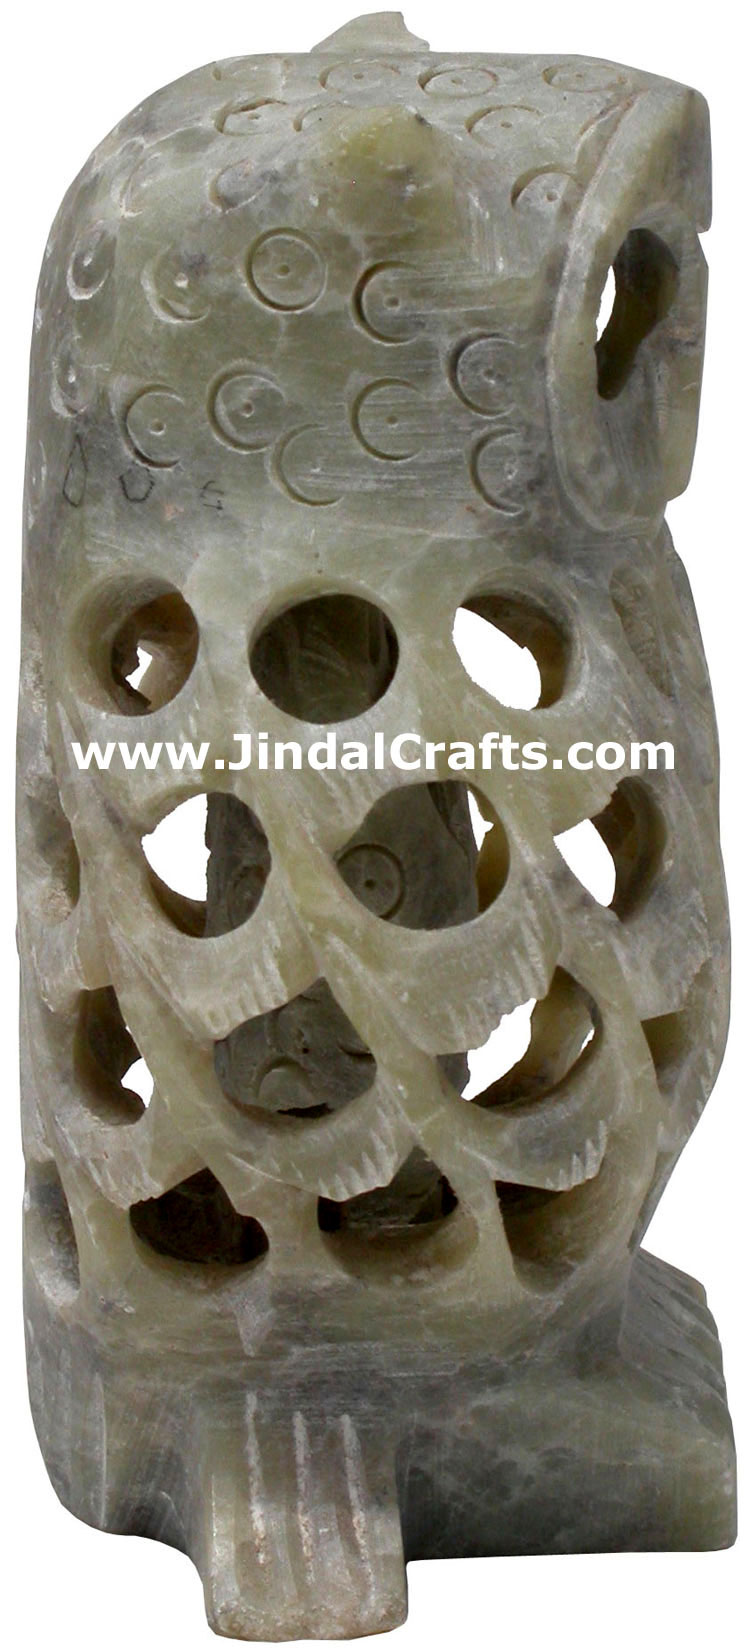 Baby Owl - Hand Carved Soft Stone Birds Figures India